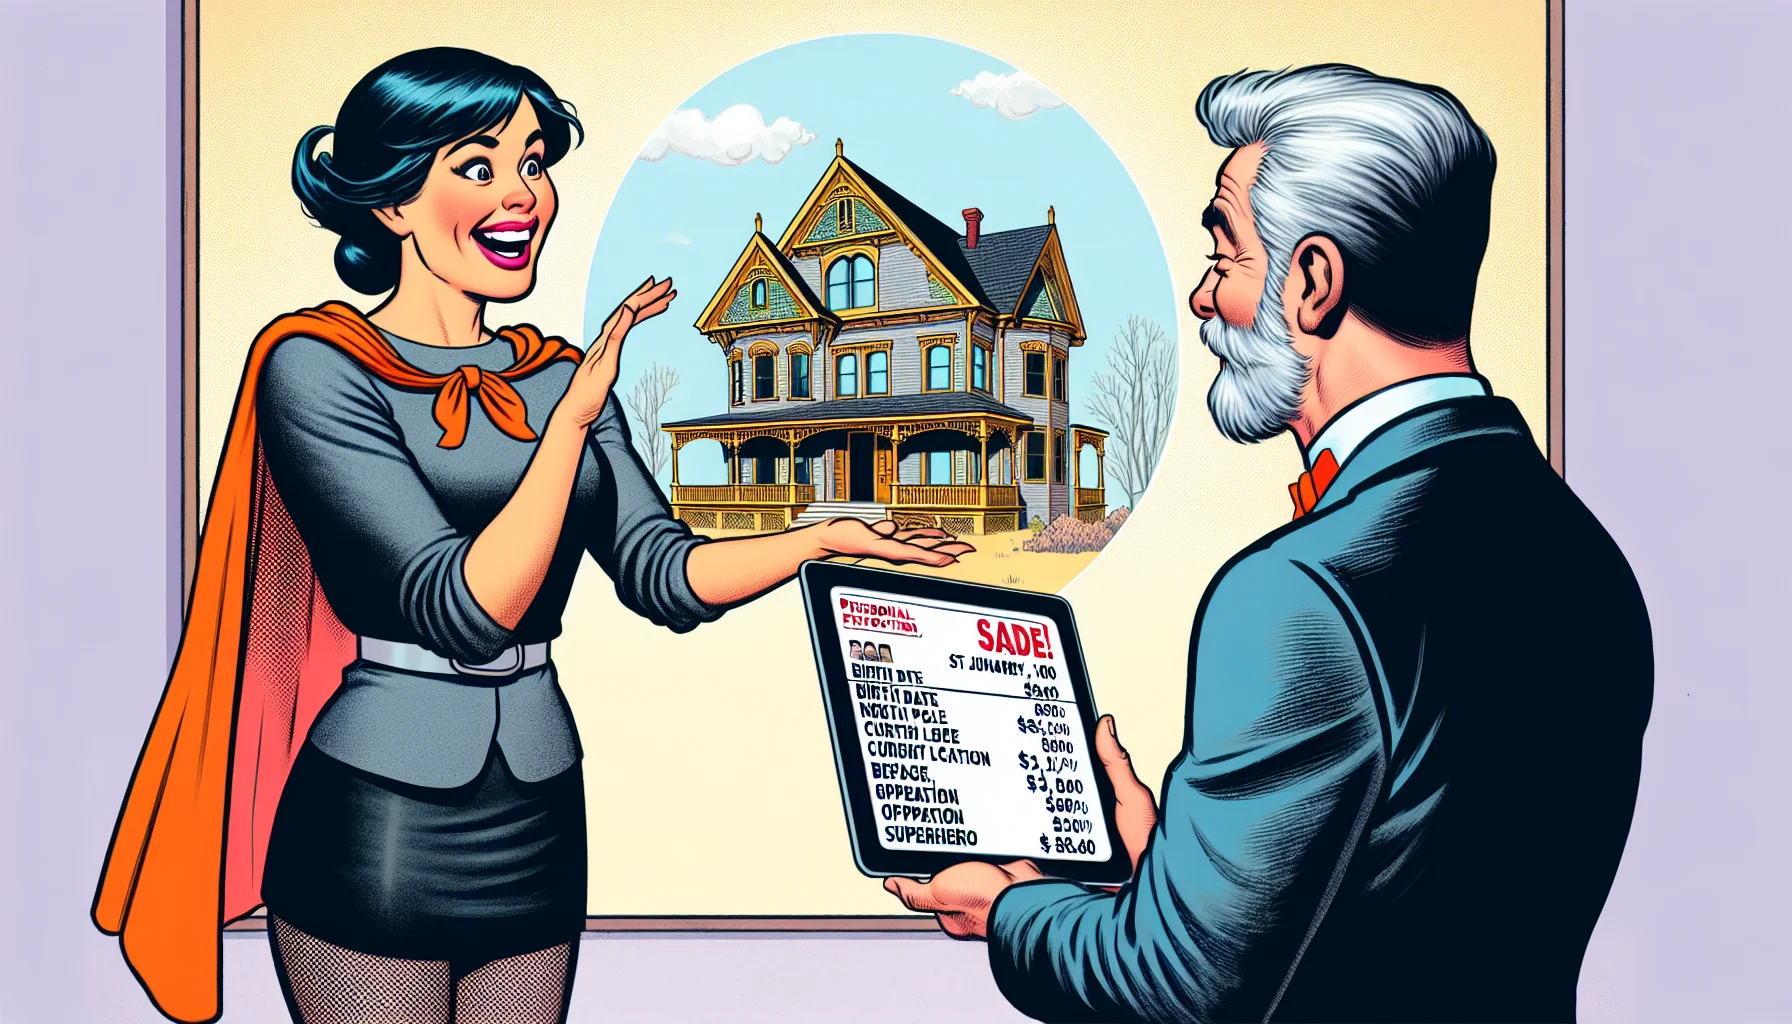 Illustrate a humorous, yet realistic scene showcasing the advantages of data protection in an ideal real-estate scenario. Picture a realtor, a Hispanic woman in her early thirties, showing a home to a potential buyer, an older Caucasian man. The realtor is presenting a digital tablet displaying a beautifully renovated Victorian house. All personal data fields are conspicuous with unusual entries - the birth date is '1st January 1800', the current location is 'North Pole', and occupation is 'Superhero'. The man reacts with amusement and surprise, highlighting the extent at which data privacy is maintained.